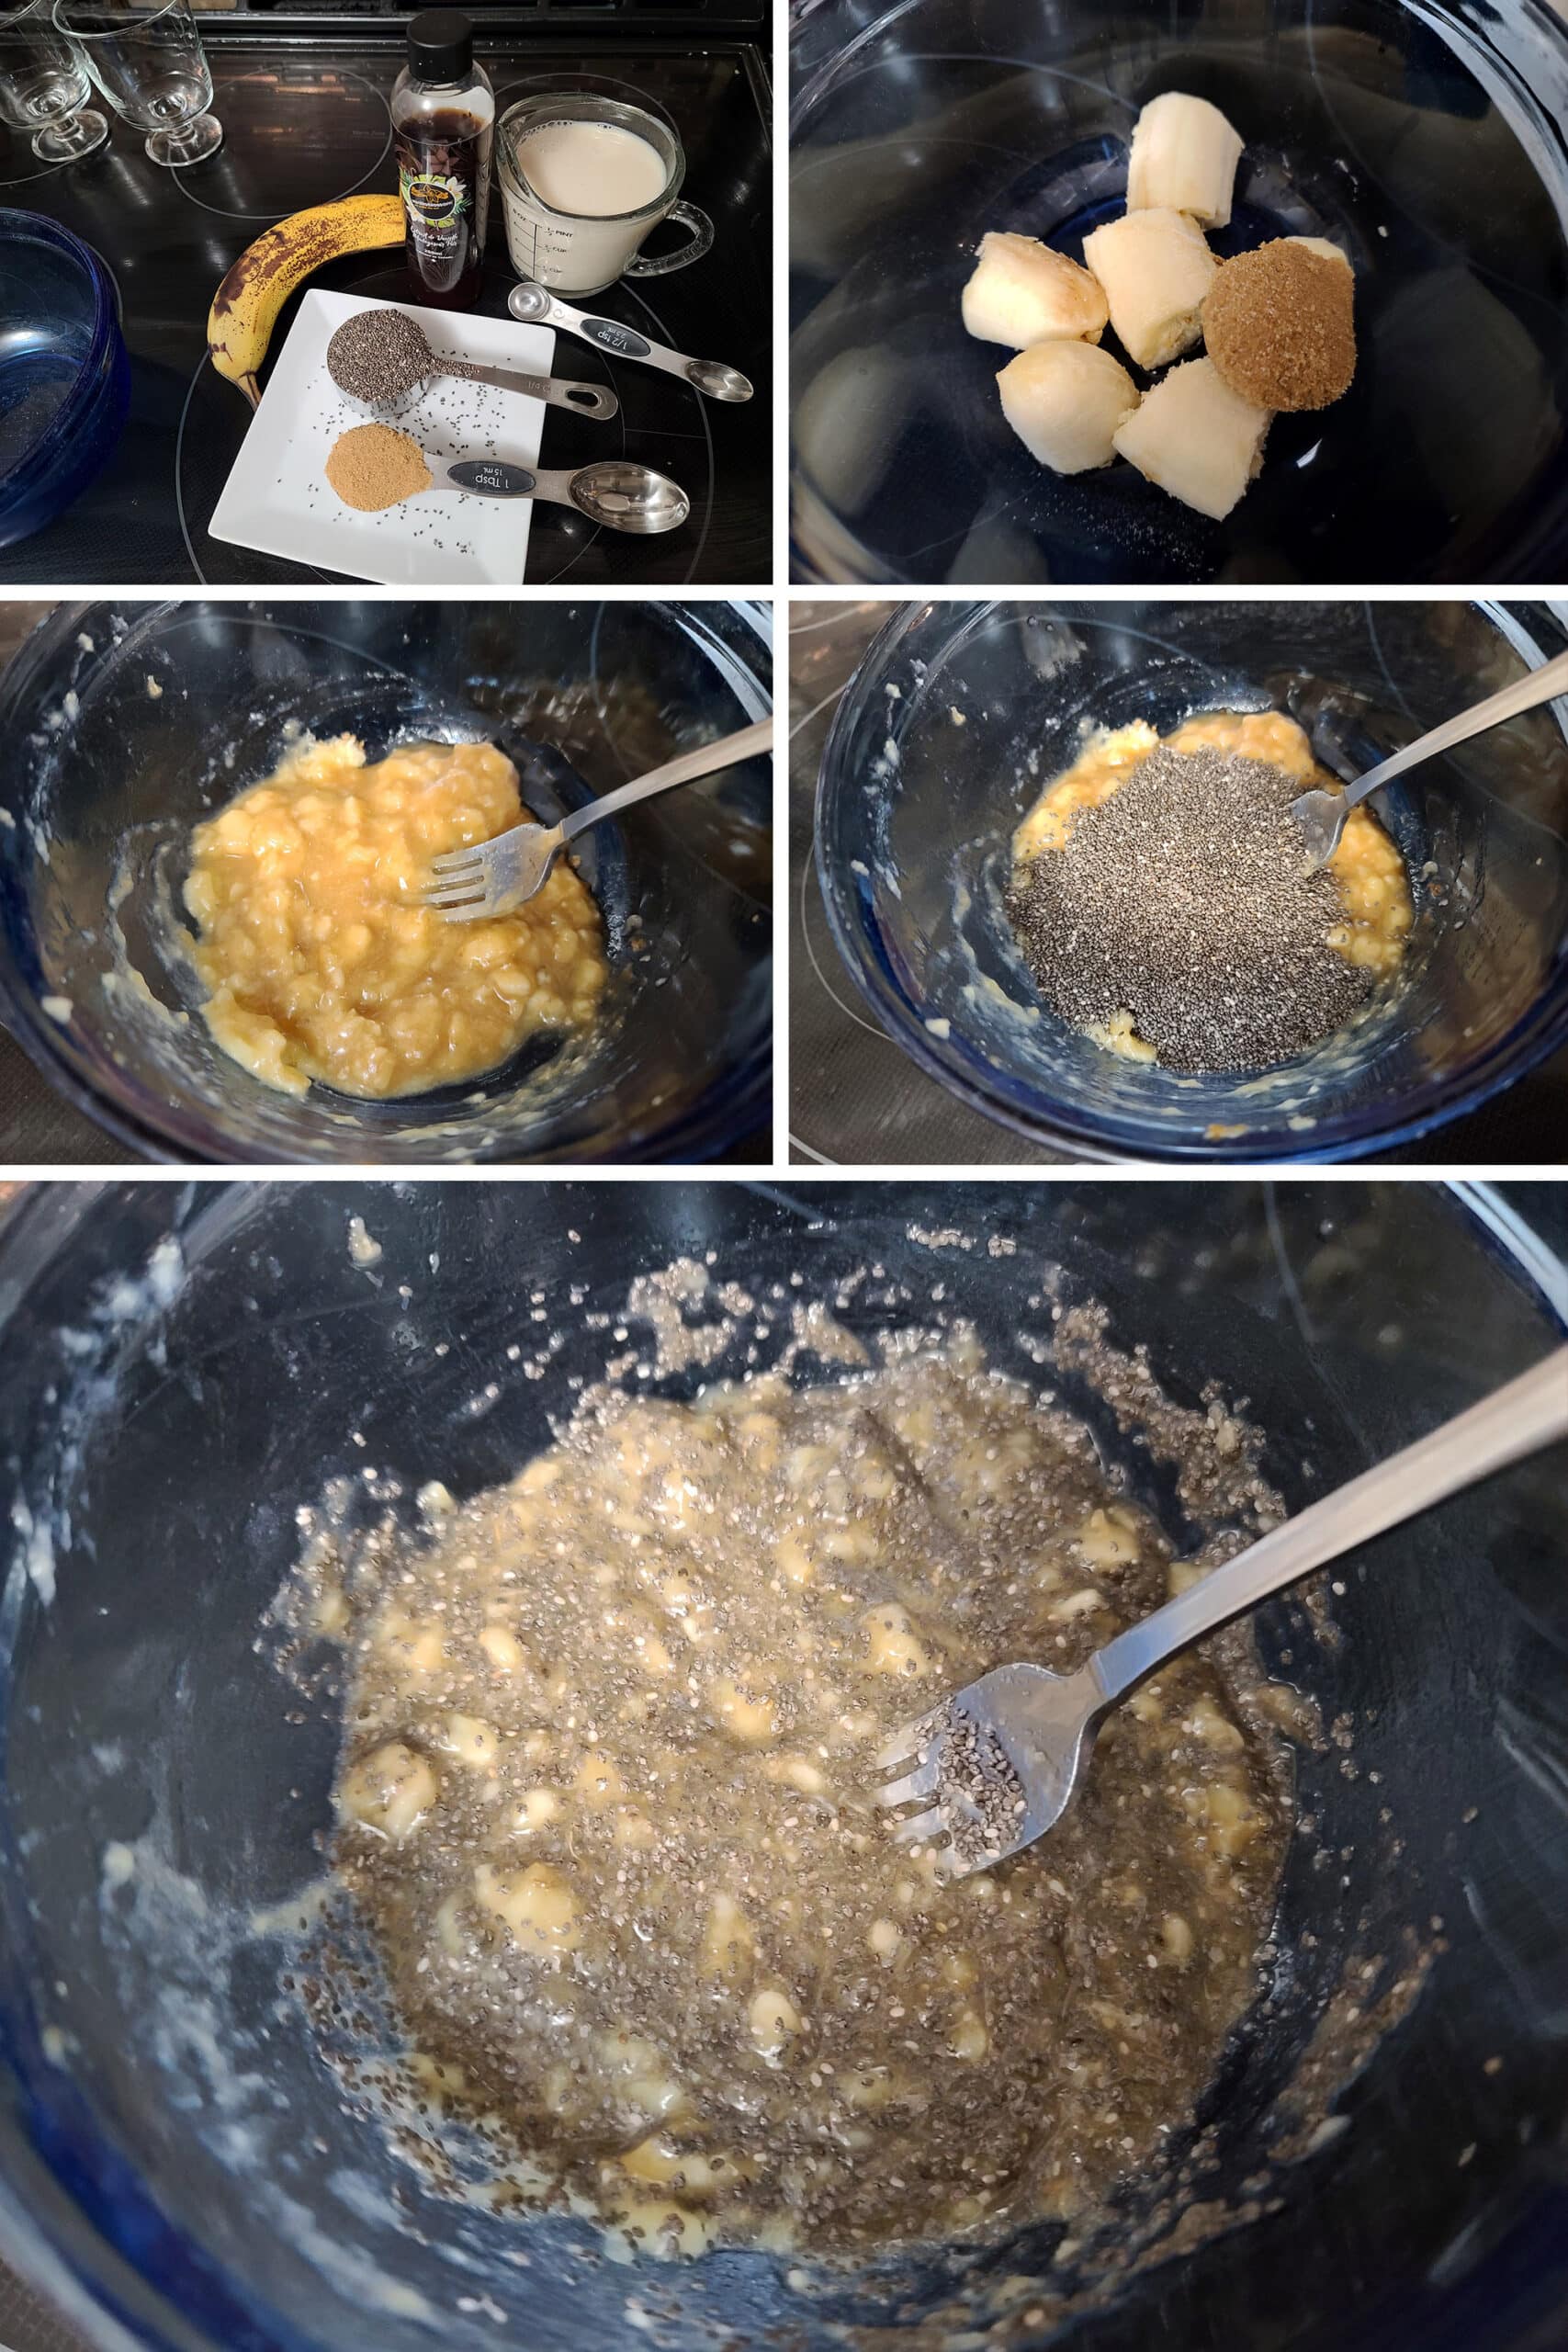 A 5 part image showing the bananas being mashed with brown sugar, then the chia seeds being mixed in.